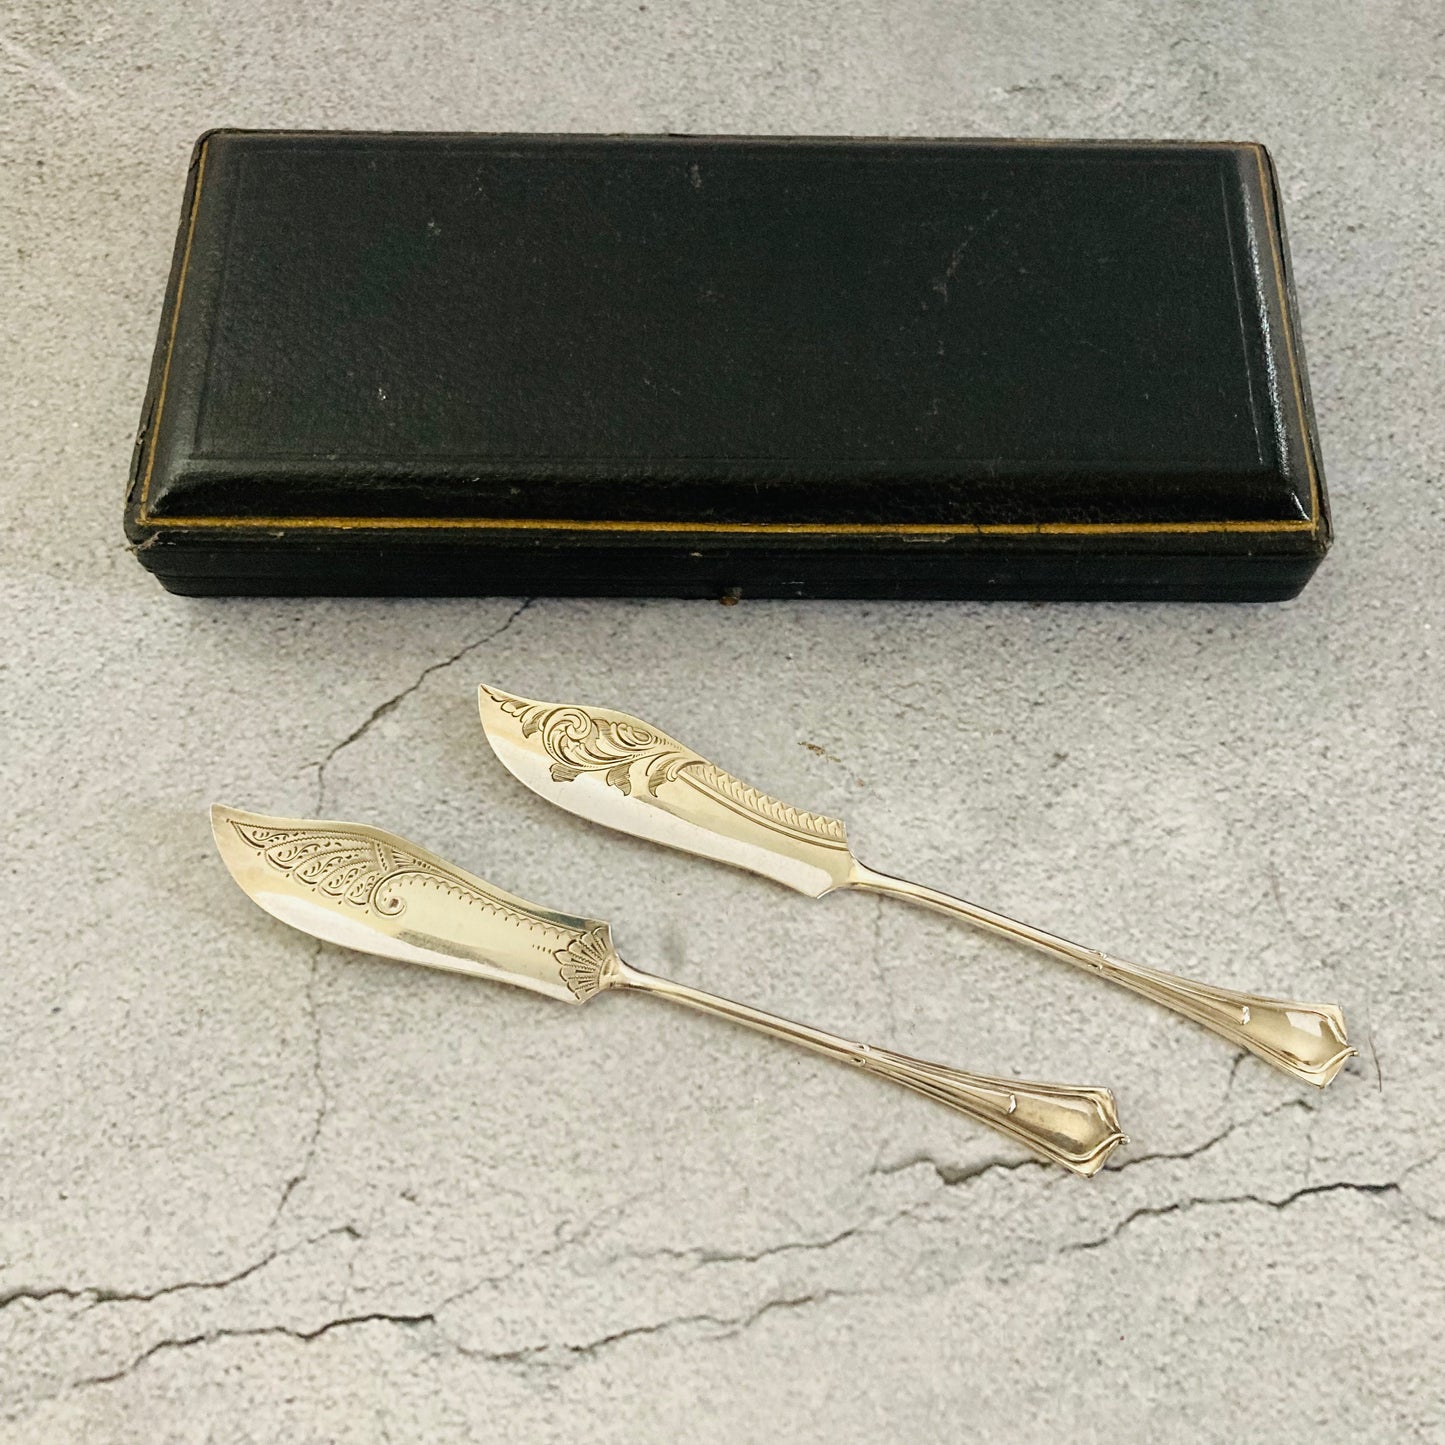 Antique Silver Engraved Miniature Butter Knives